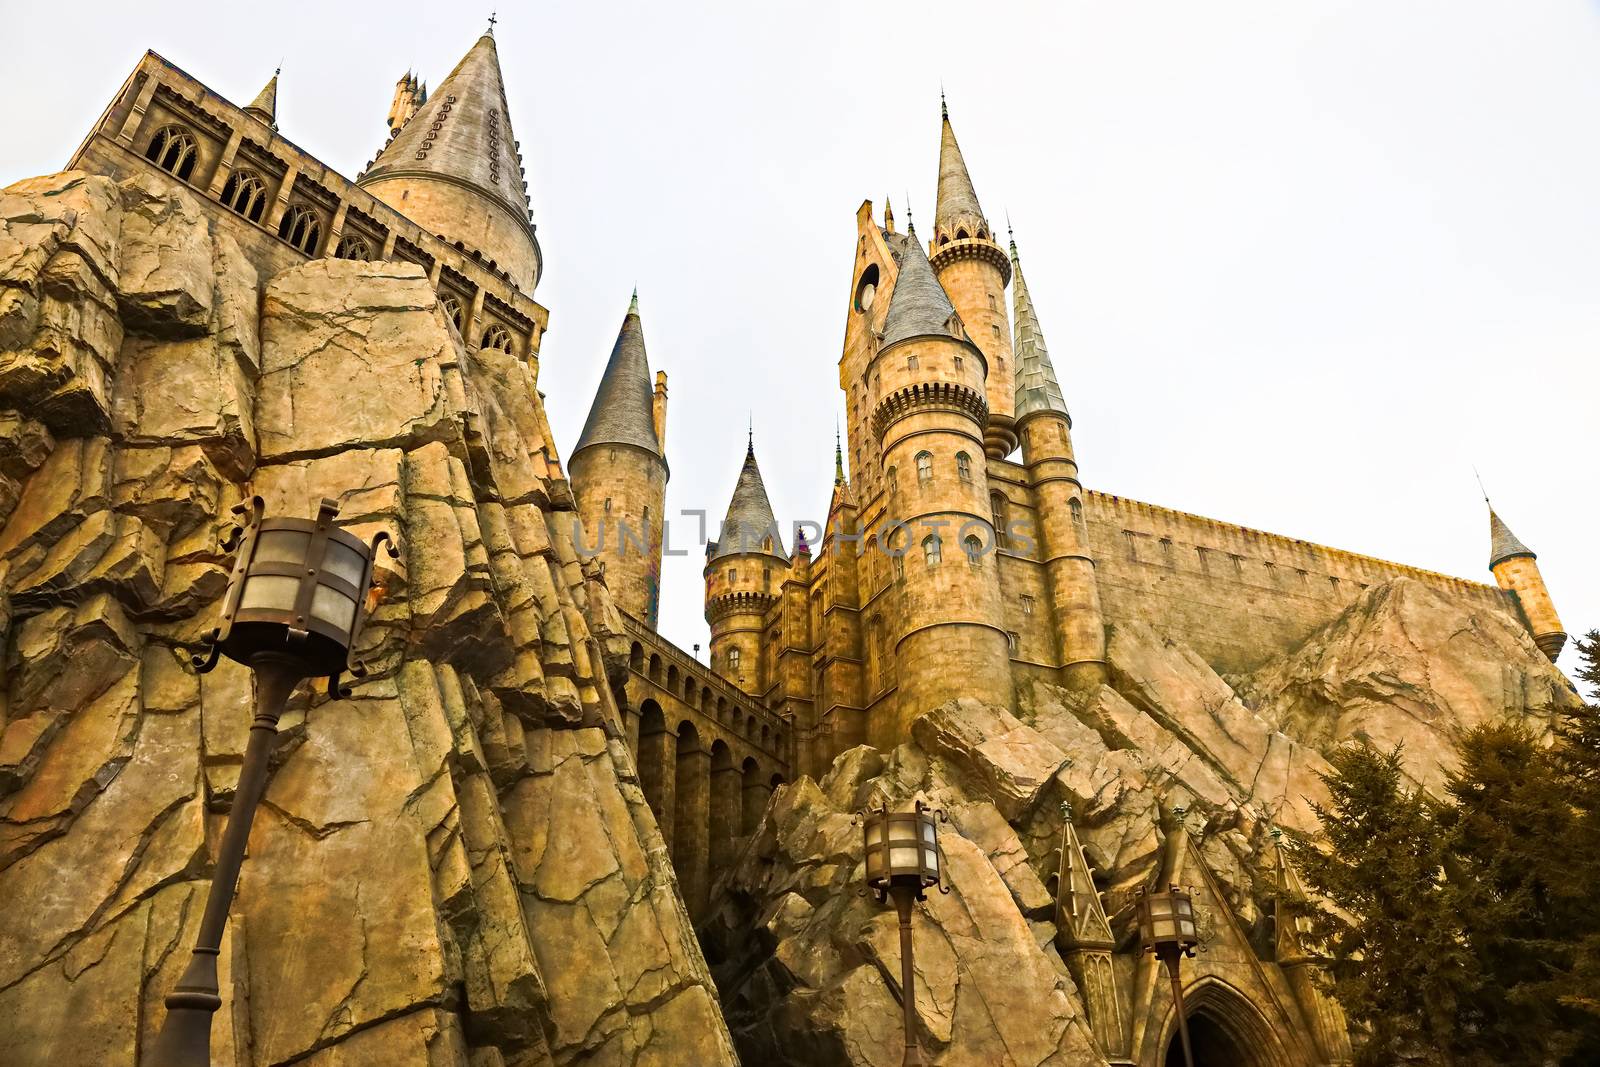 Osaka, Japan - Aug 15, 2020: View of Hogwarts castle at the Wizarding World of Harry Potter in Universal Studios Japan. by USA-TARO